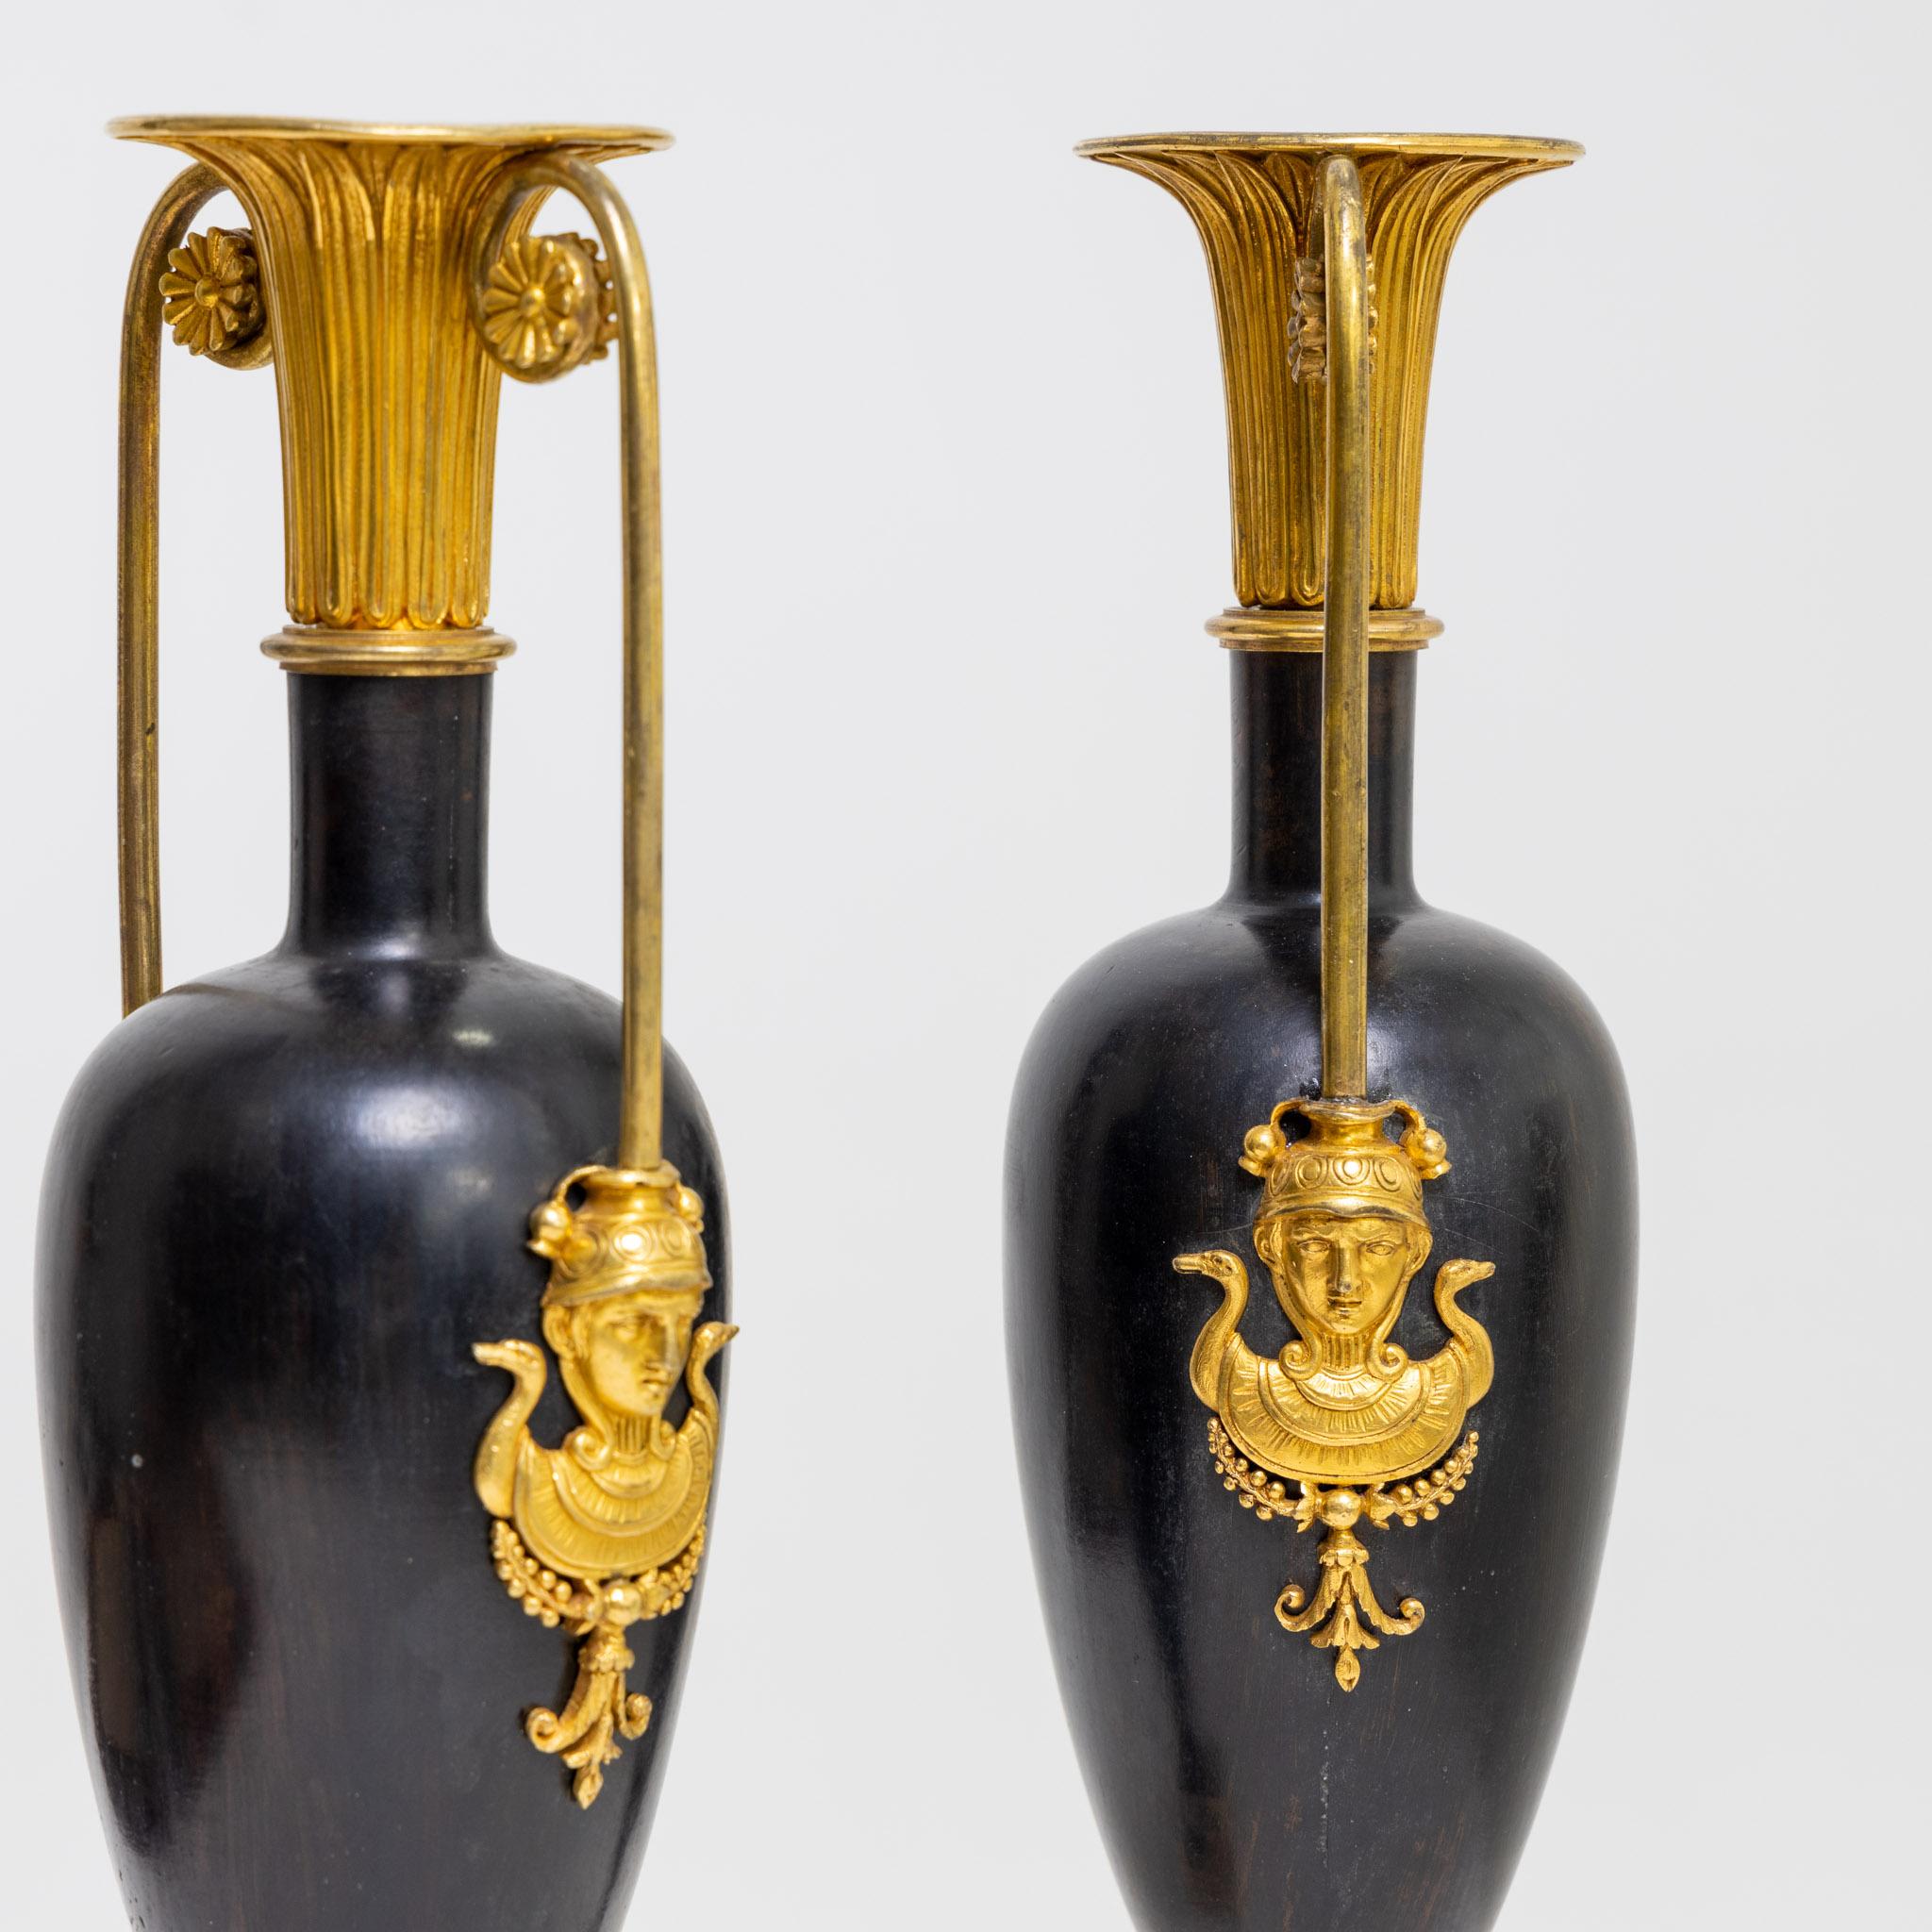 Fired Retour D'egypte Vases, Early 19th Century For Sale